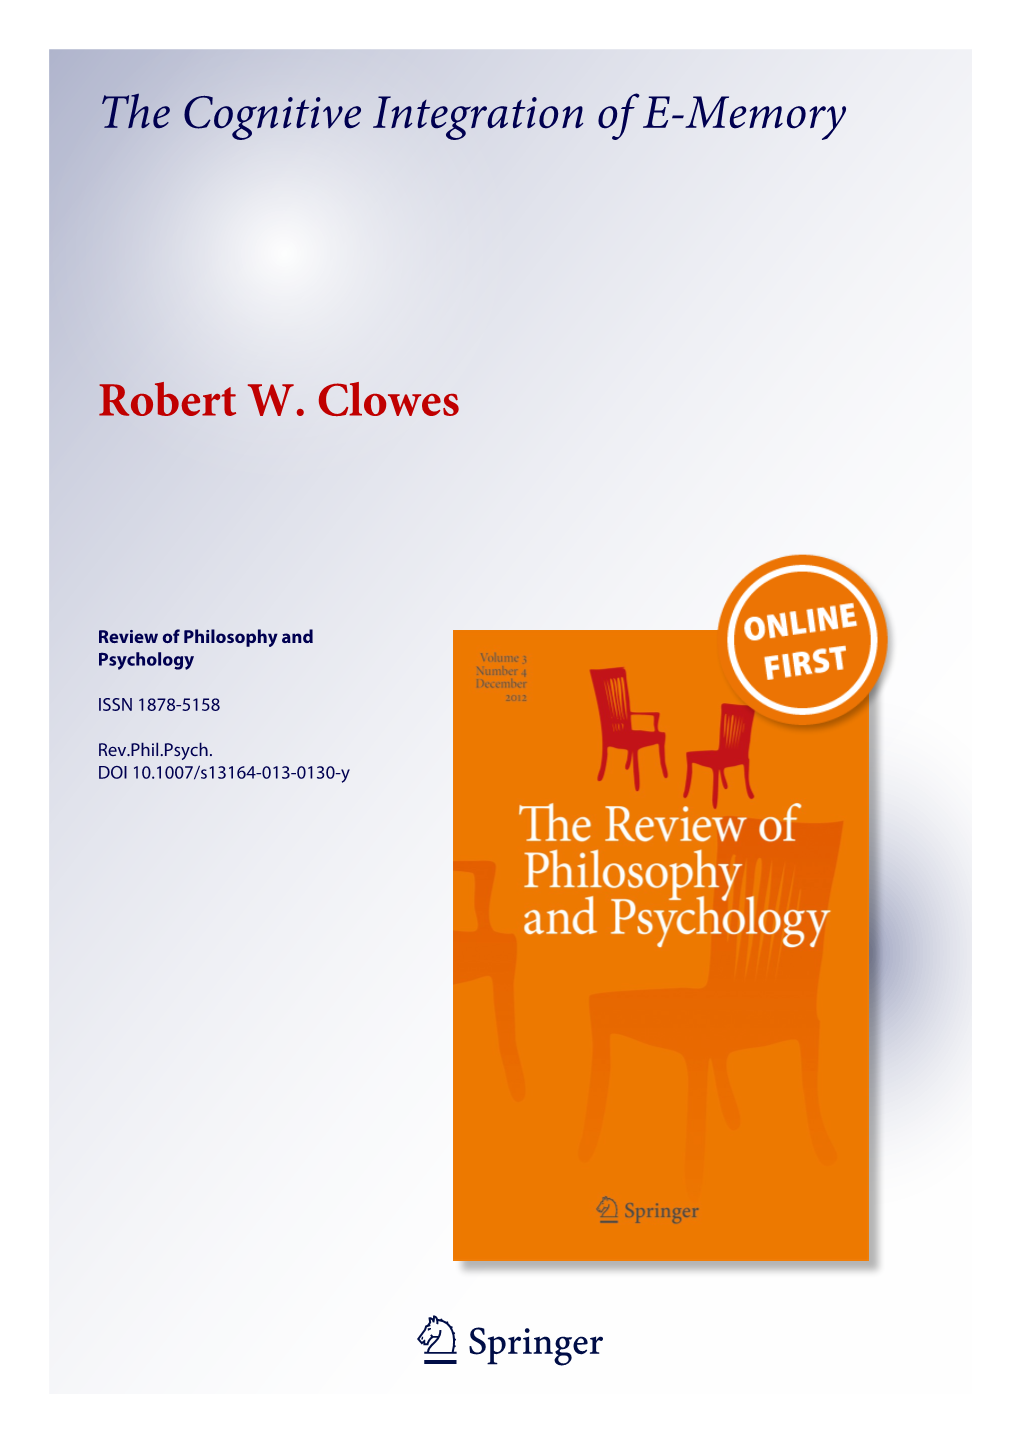 The Cognitive Integration of E-Memory Robert W. Clowes